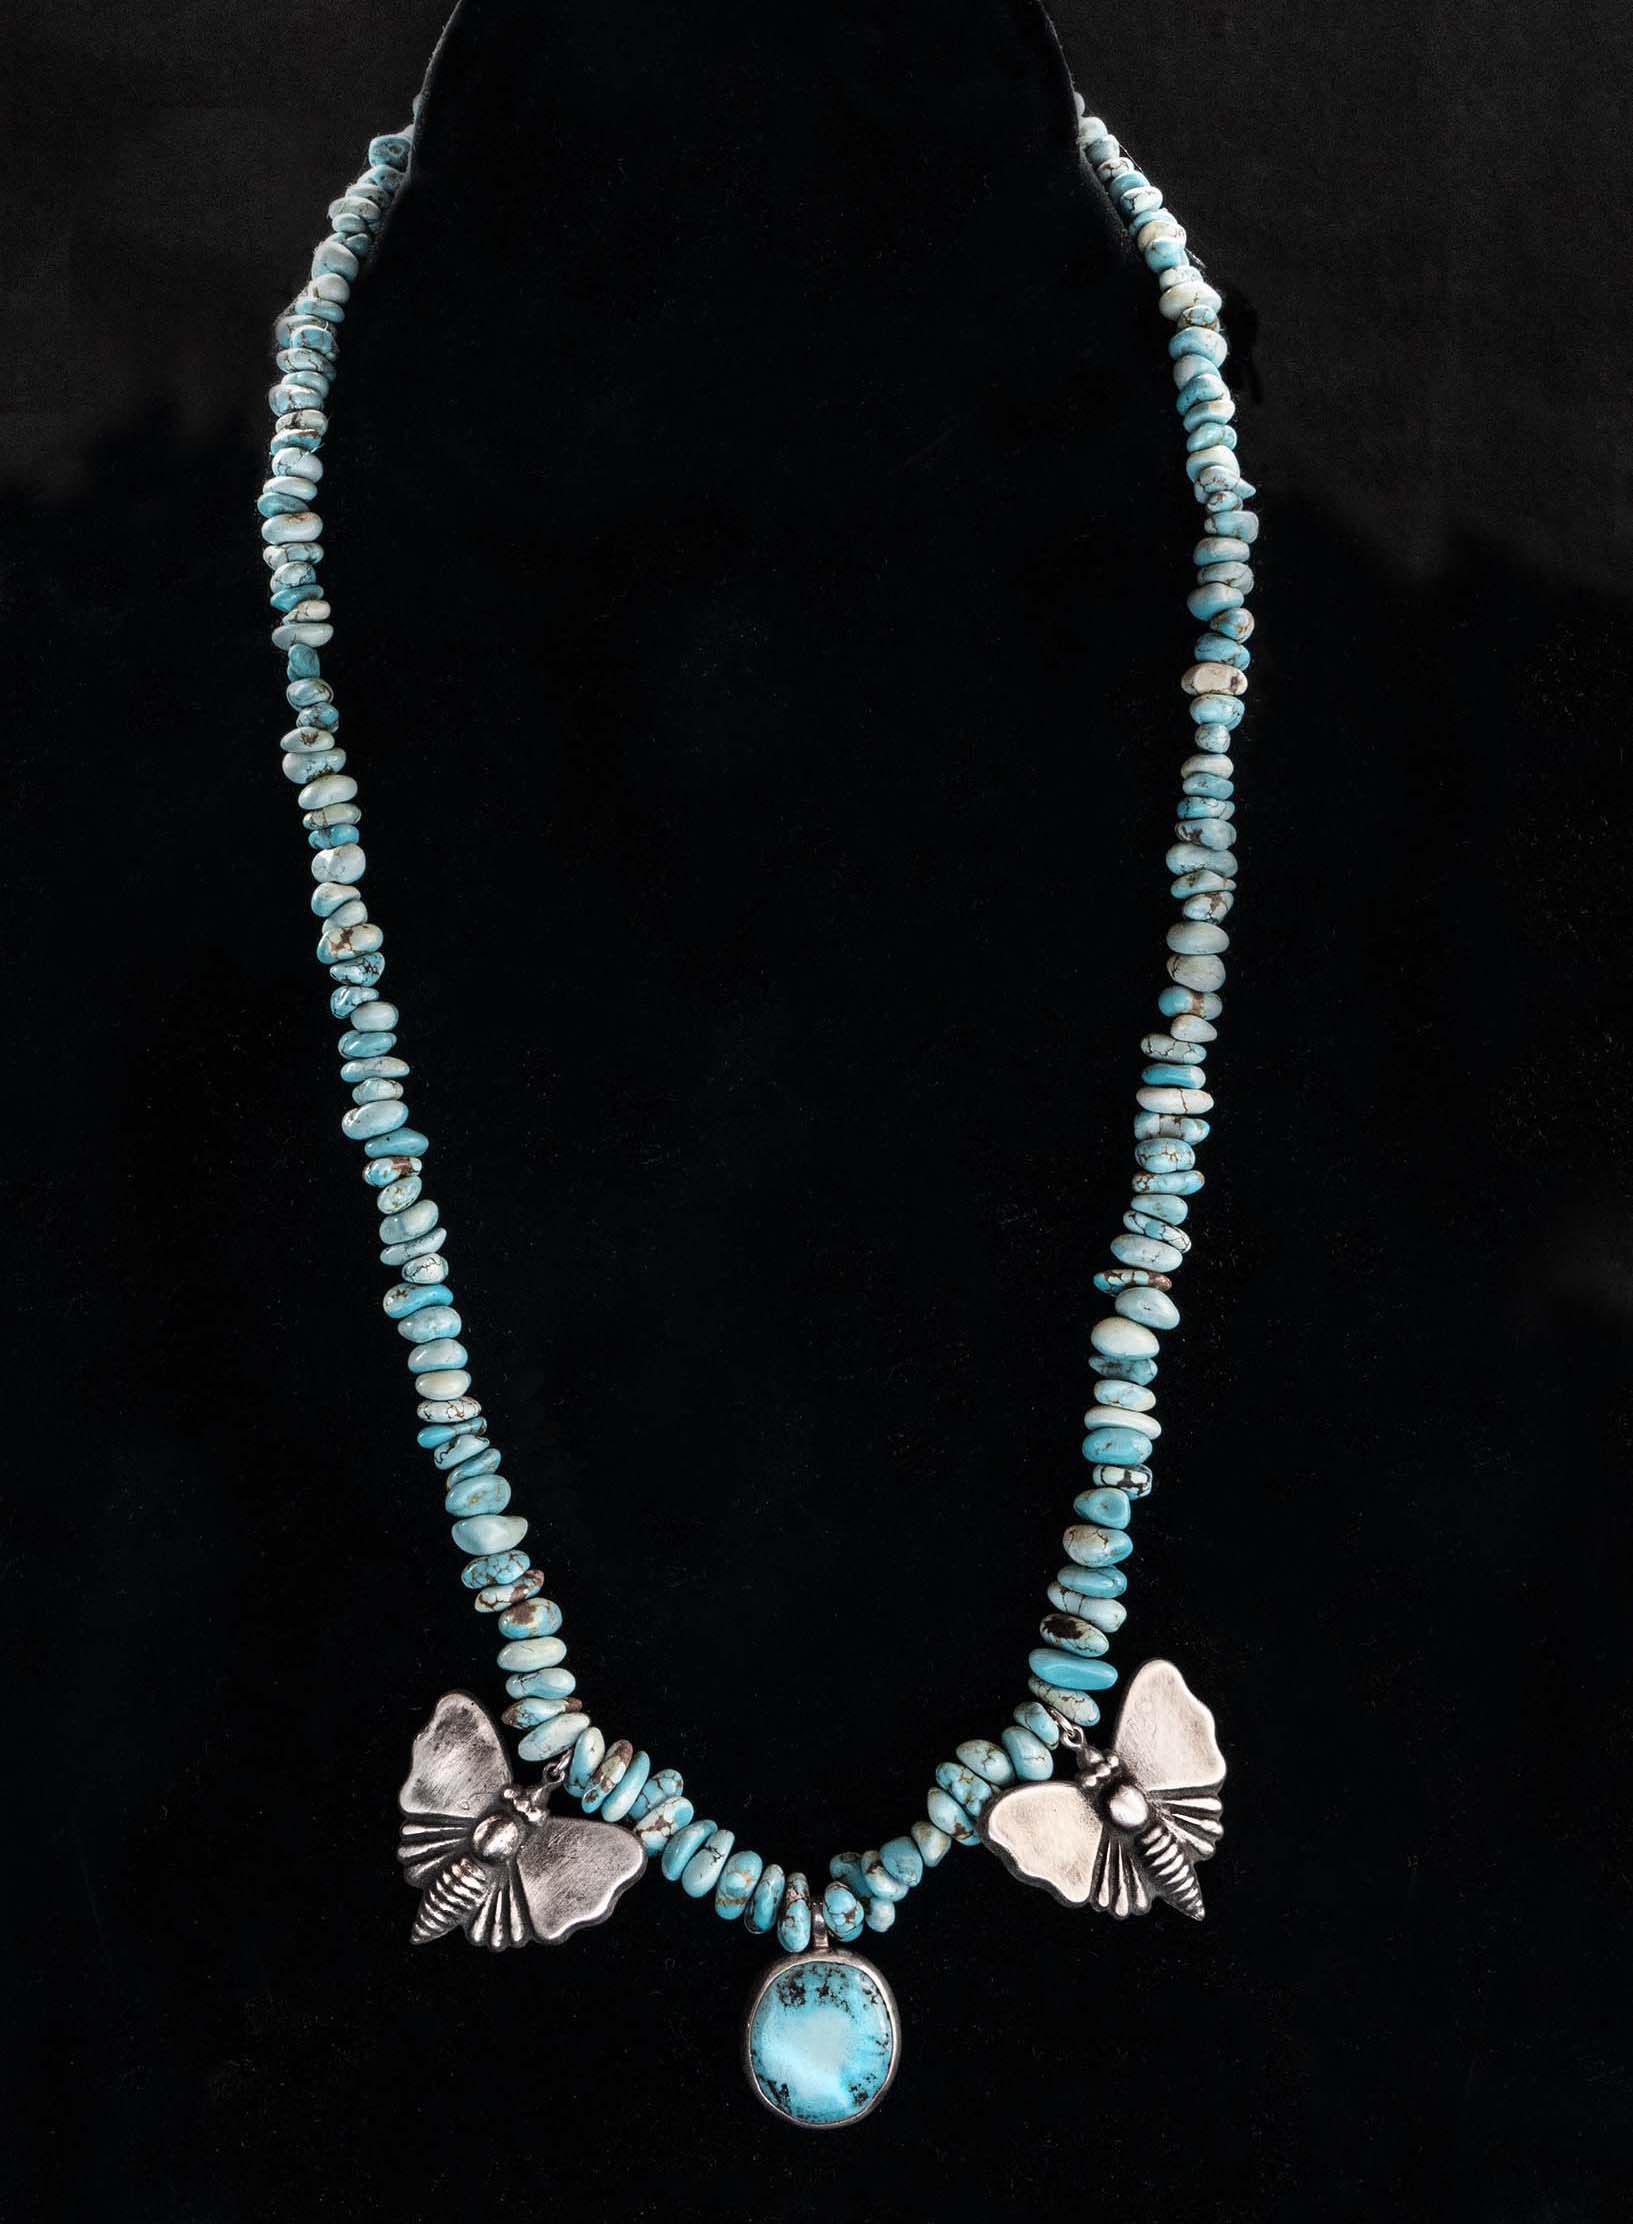 SKY BLUE MARIPOSA NECKLACE - THE NAMBE TRADING POST AND THE MUSEUM OF ...